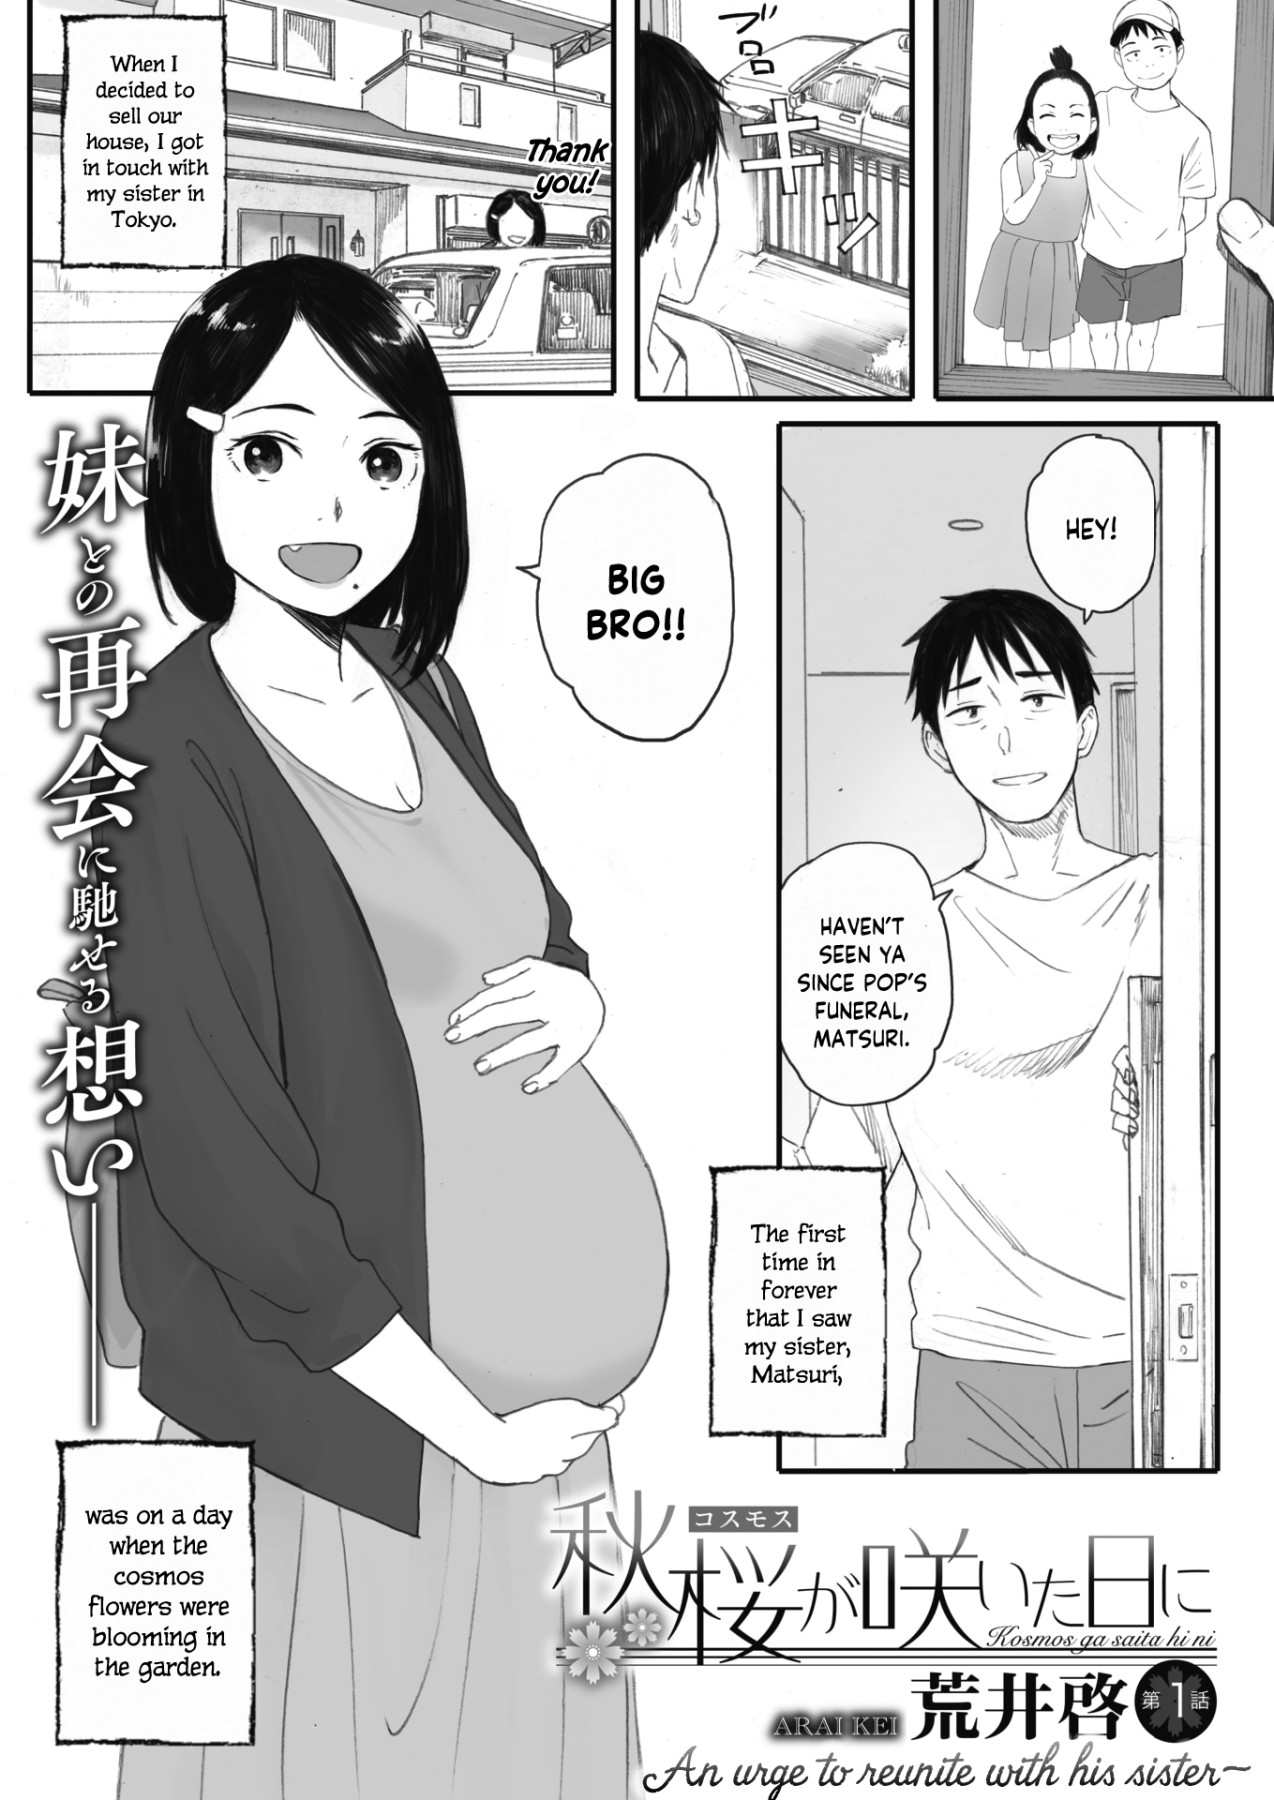 Hentai Manga Comic-The Day The Cosmos Blossomed-Chapter 1-1